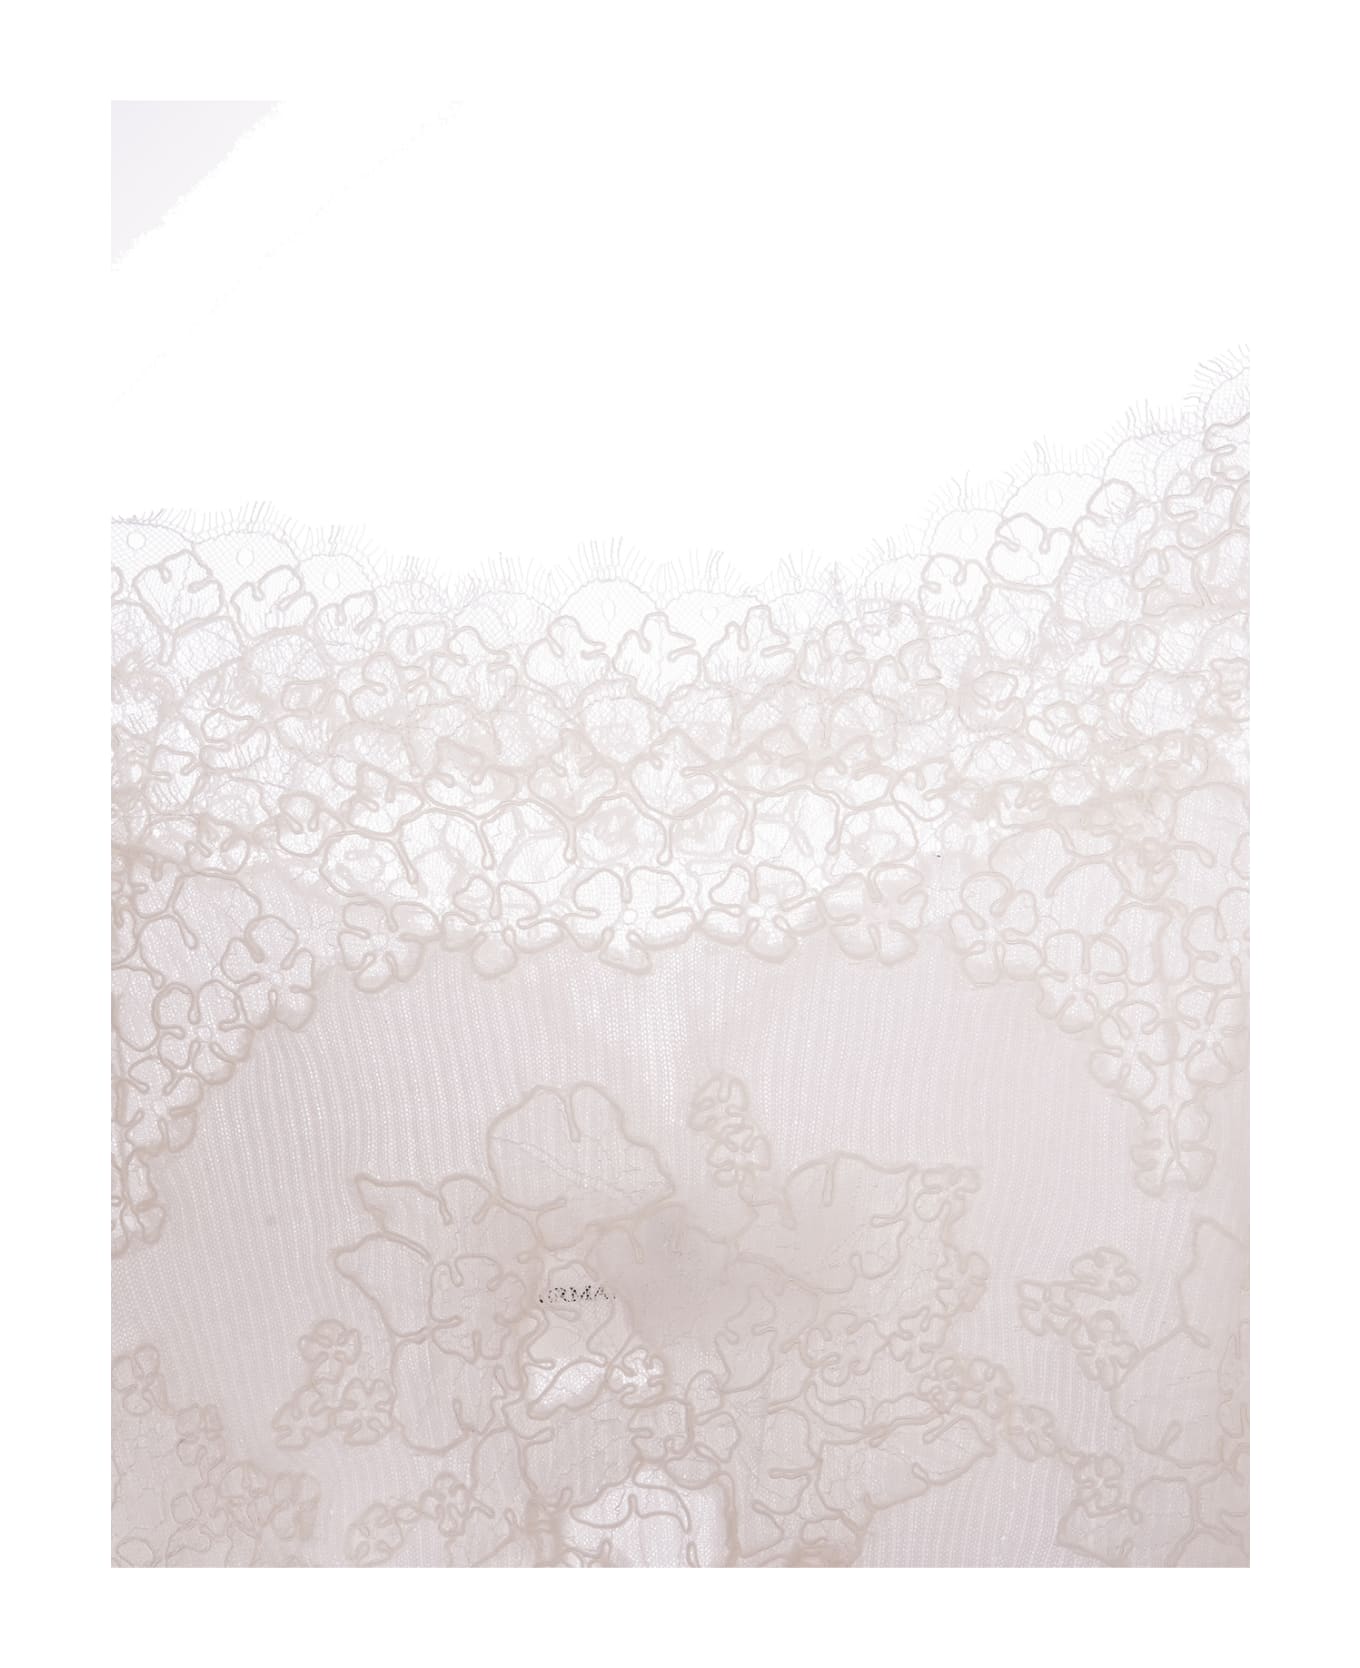 Ermanno Scervino White Sweater With Lace And Boat Neckline - White ニットウェア